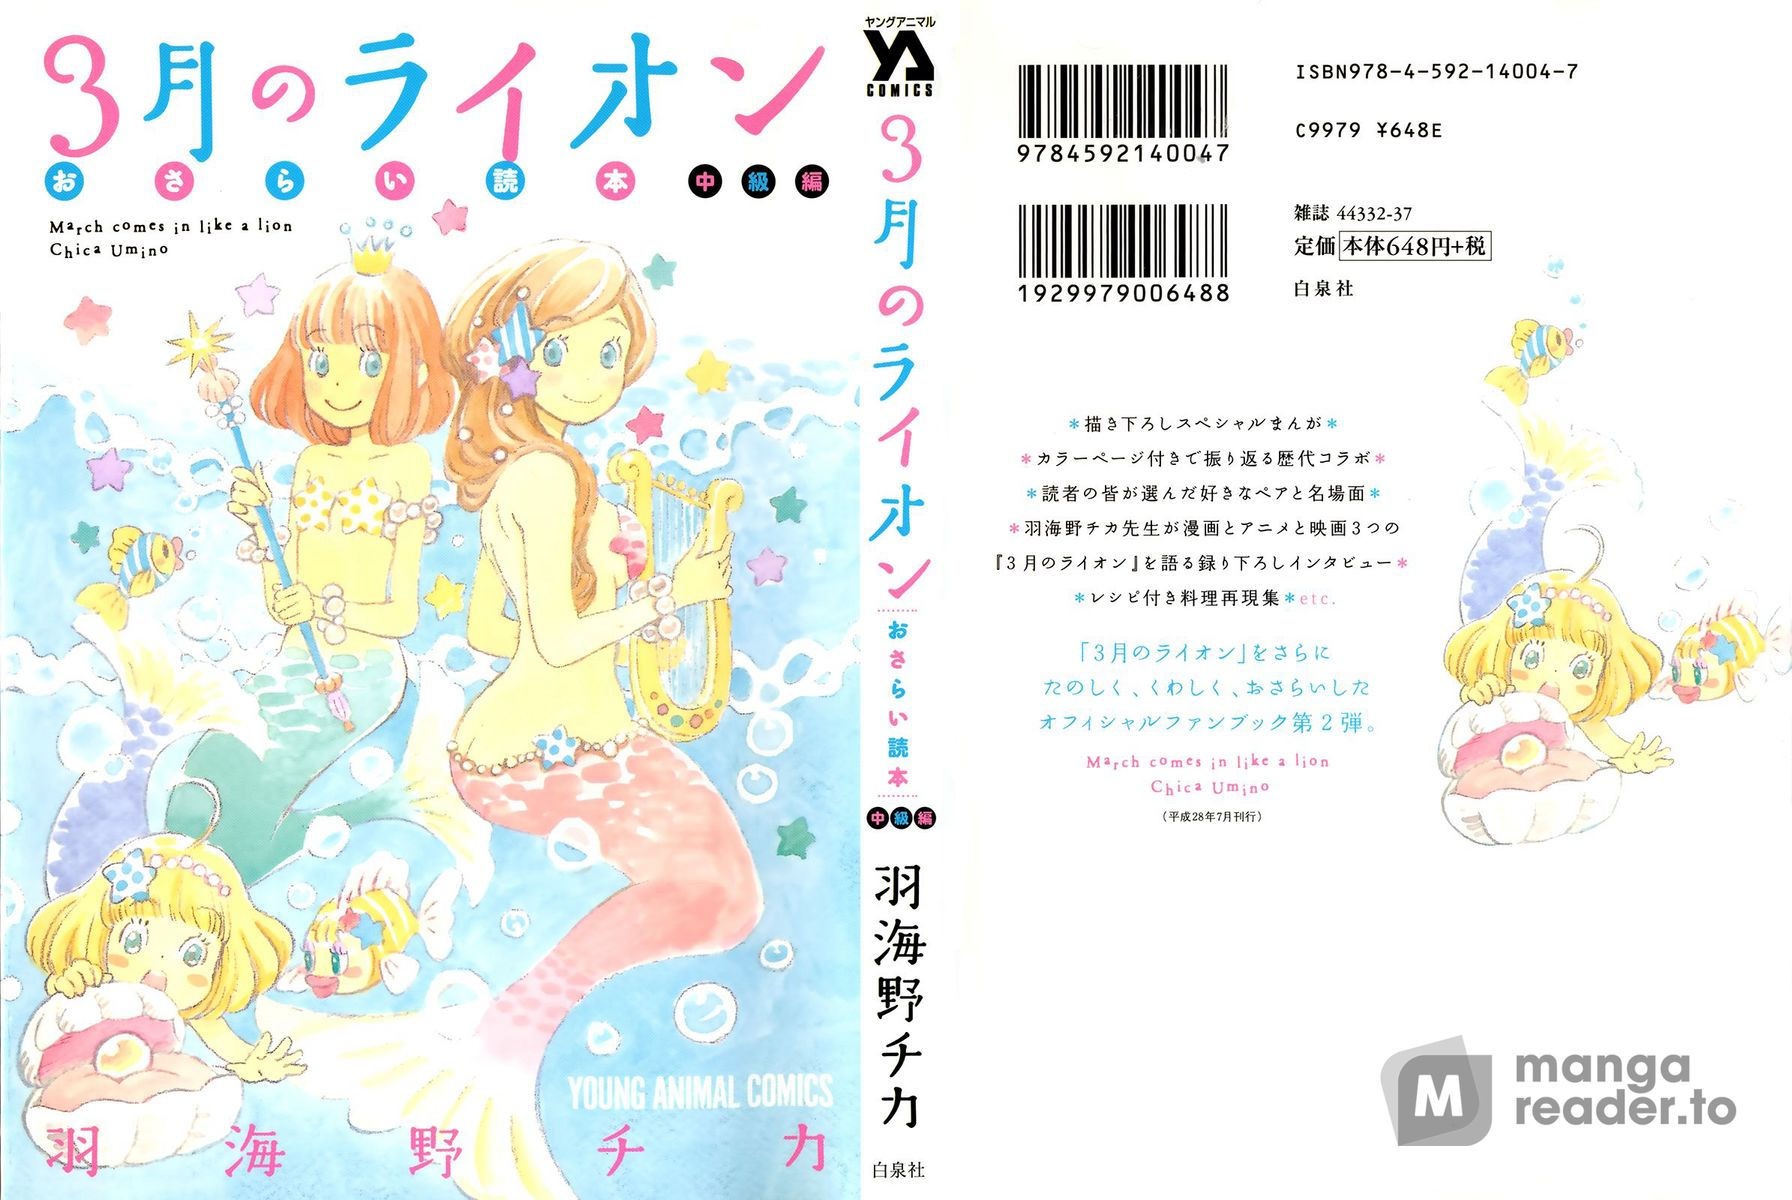 March Comes in Like a Lion, Chapter 114.6 Vol 11 Extra (EN) image 01